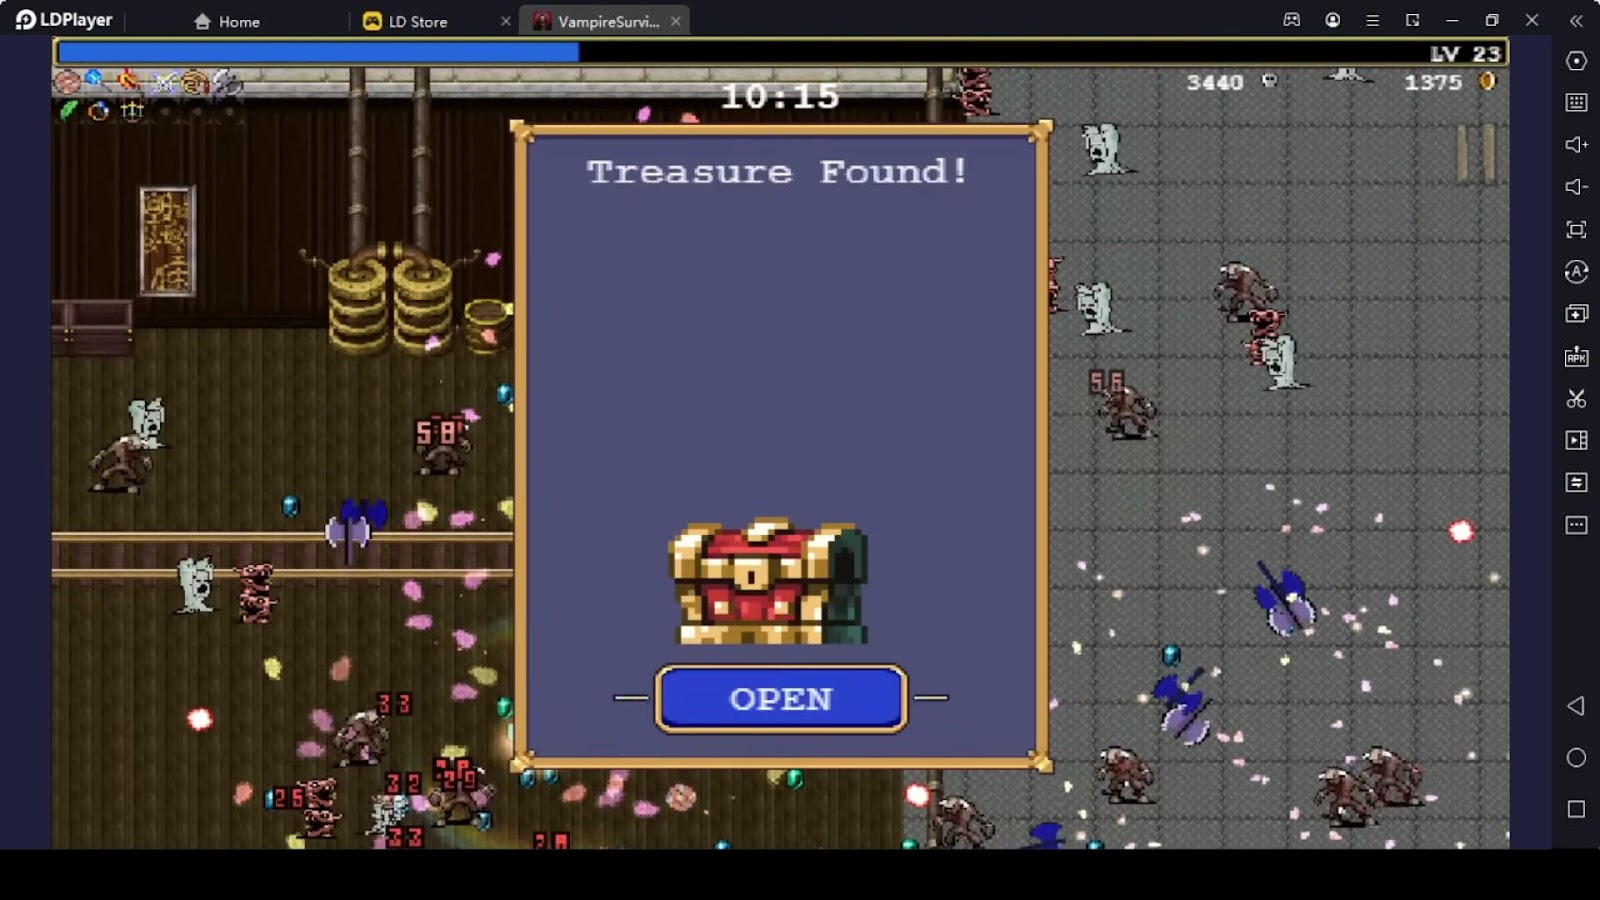 Use the Treasure Chests